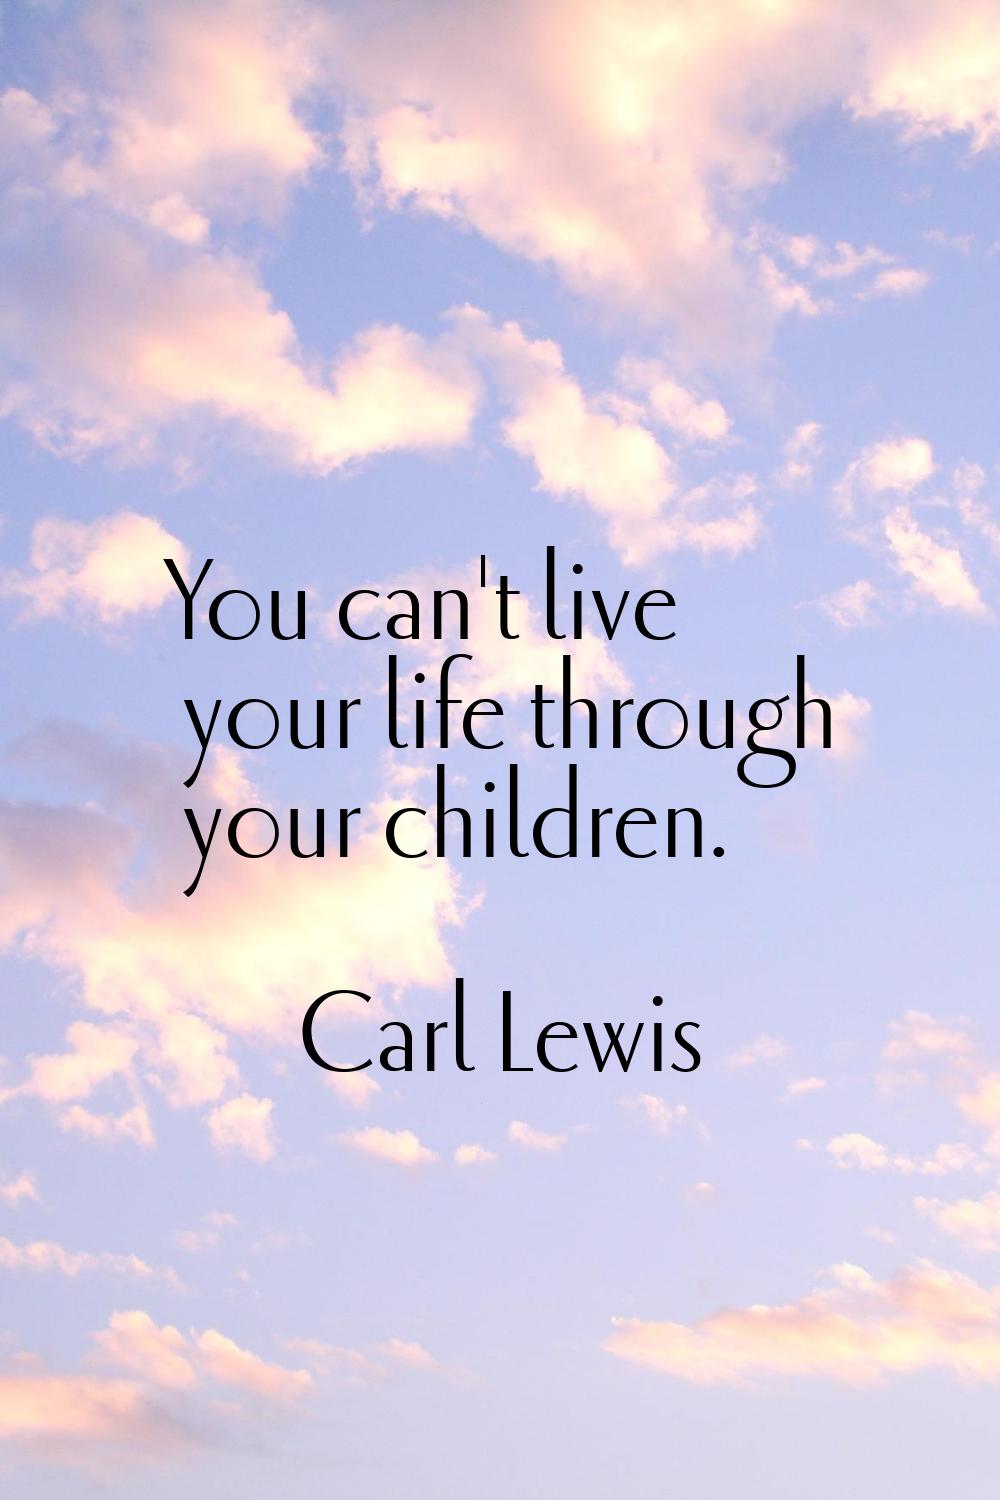 You can't live your life through your children.